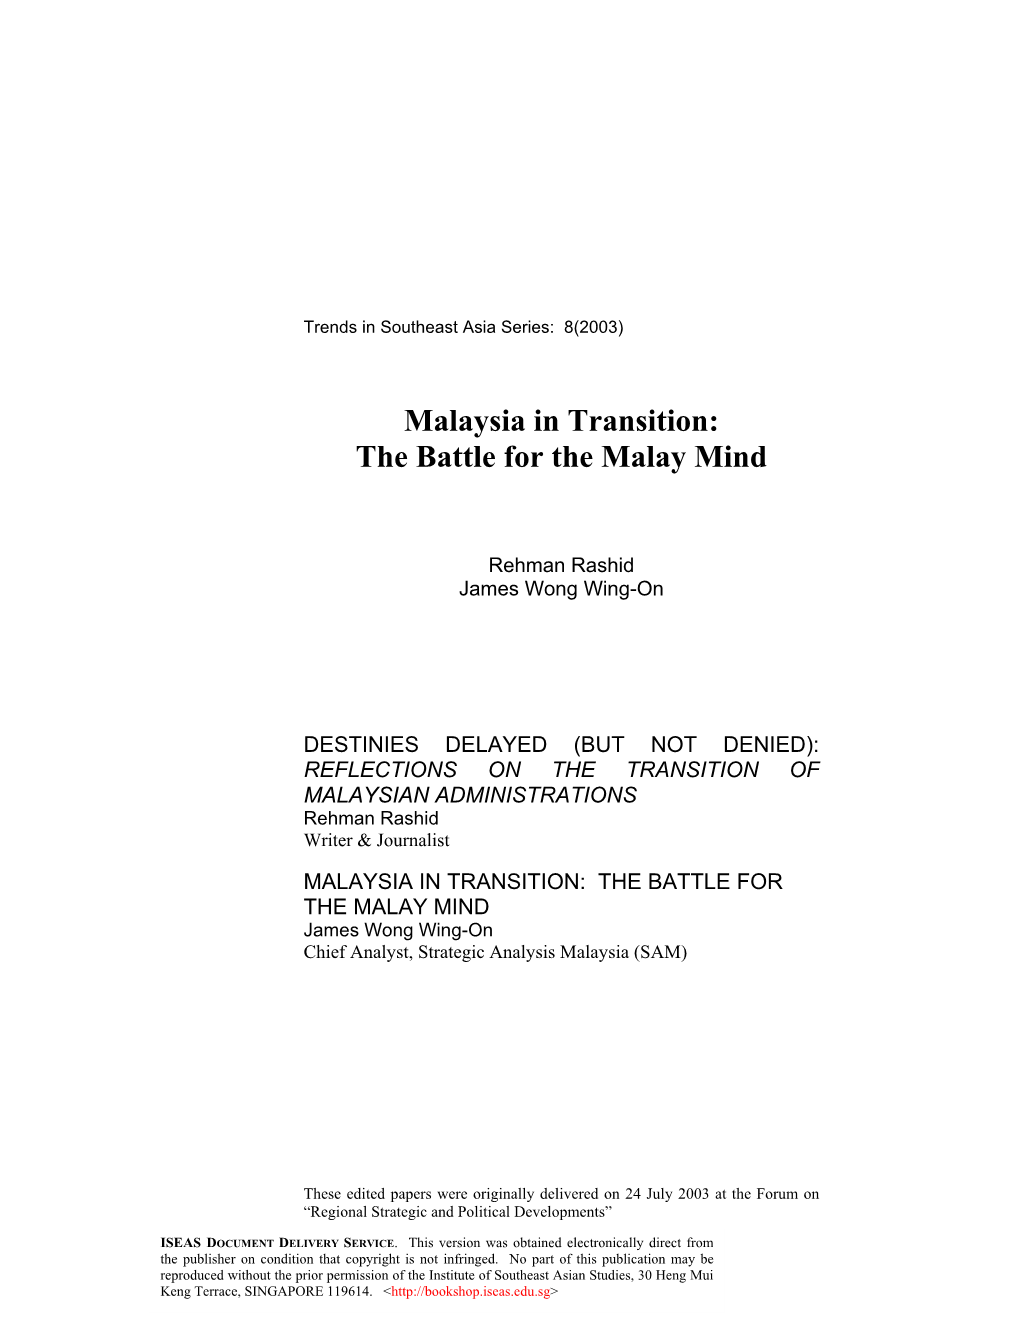 Malaysia in Transition: the Battle for the Malay Mind